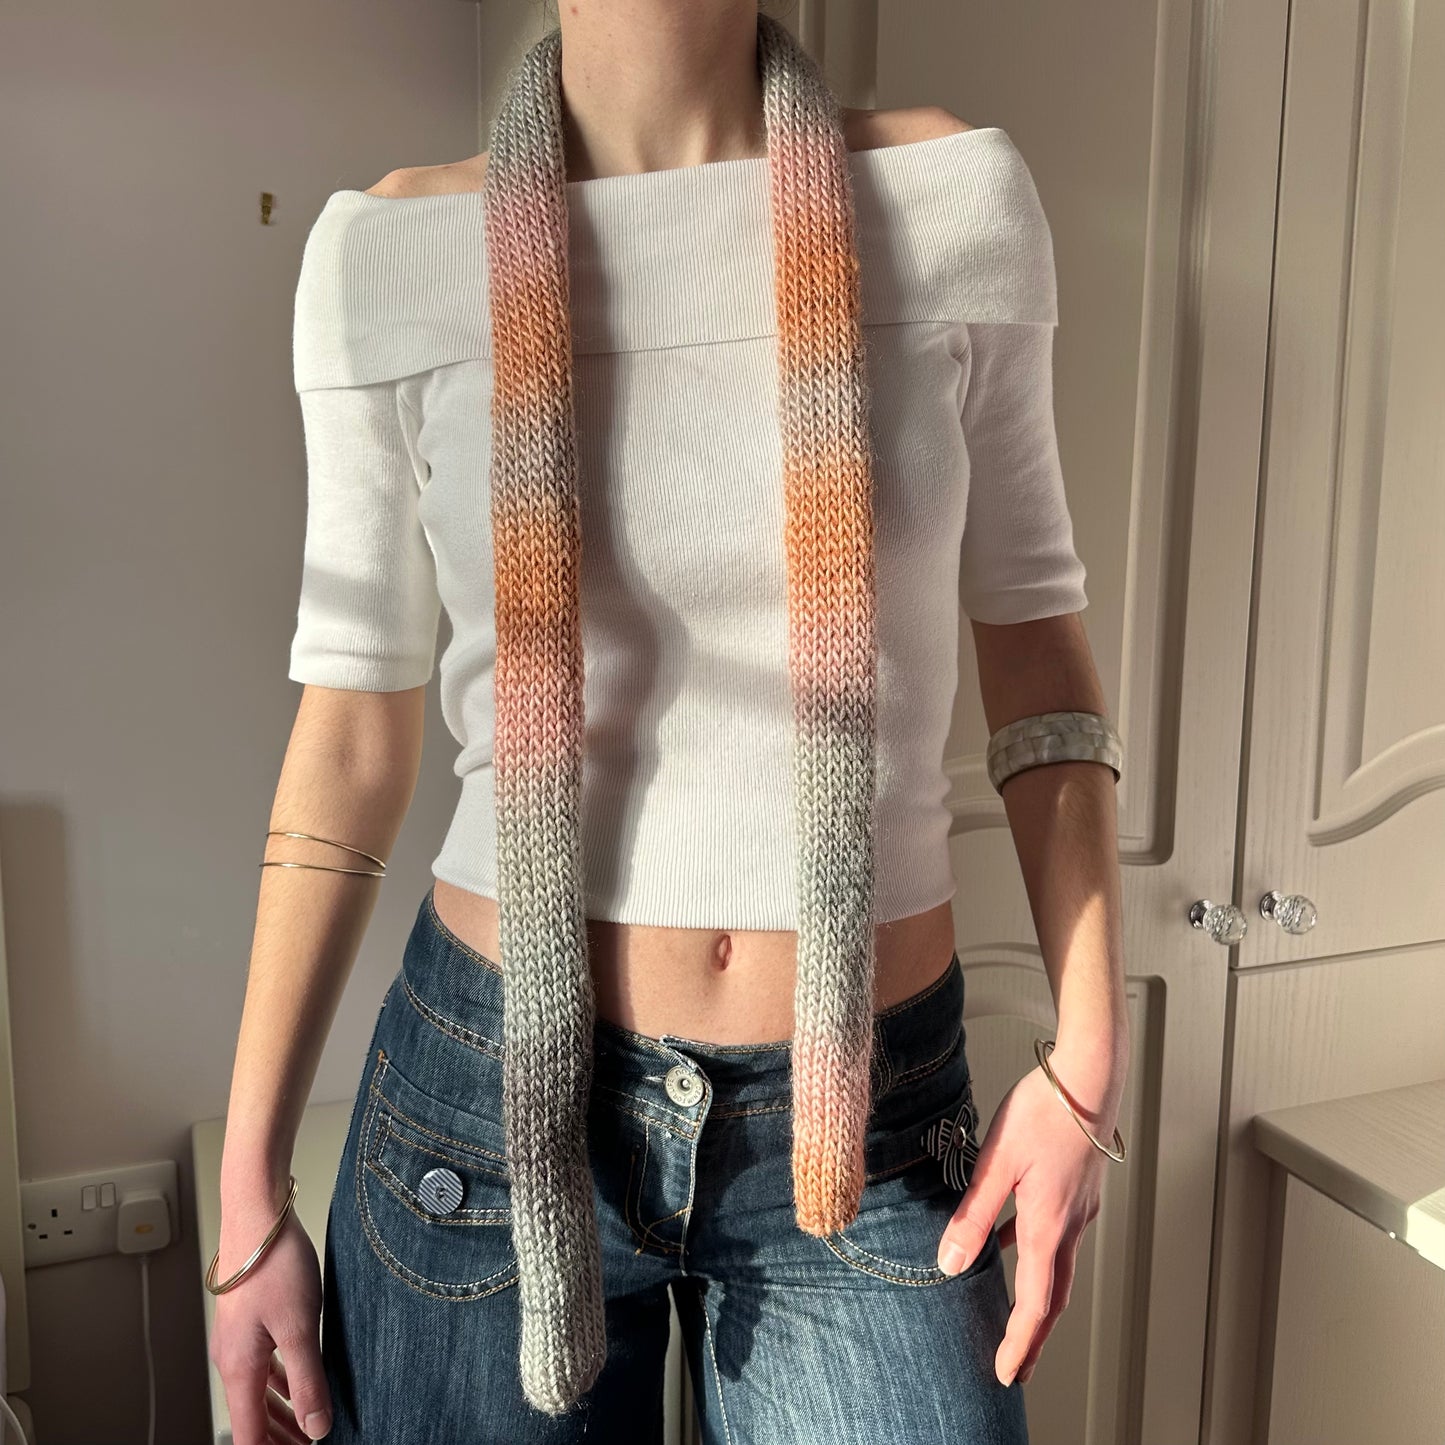 Handmade knitted ombré skinny scarf  in grey and salmon pink